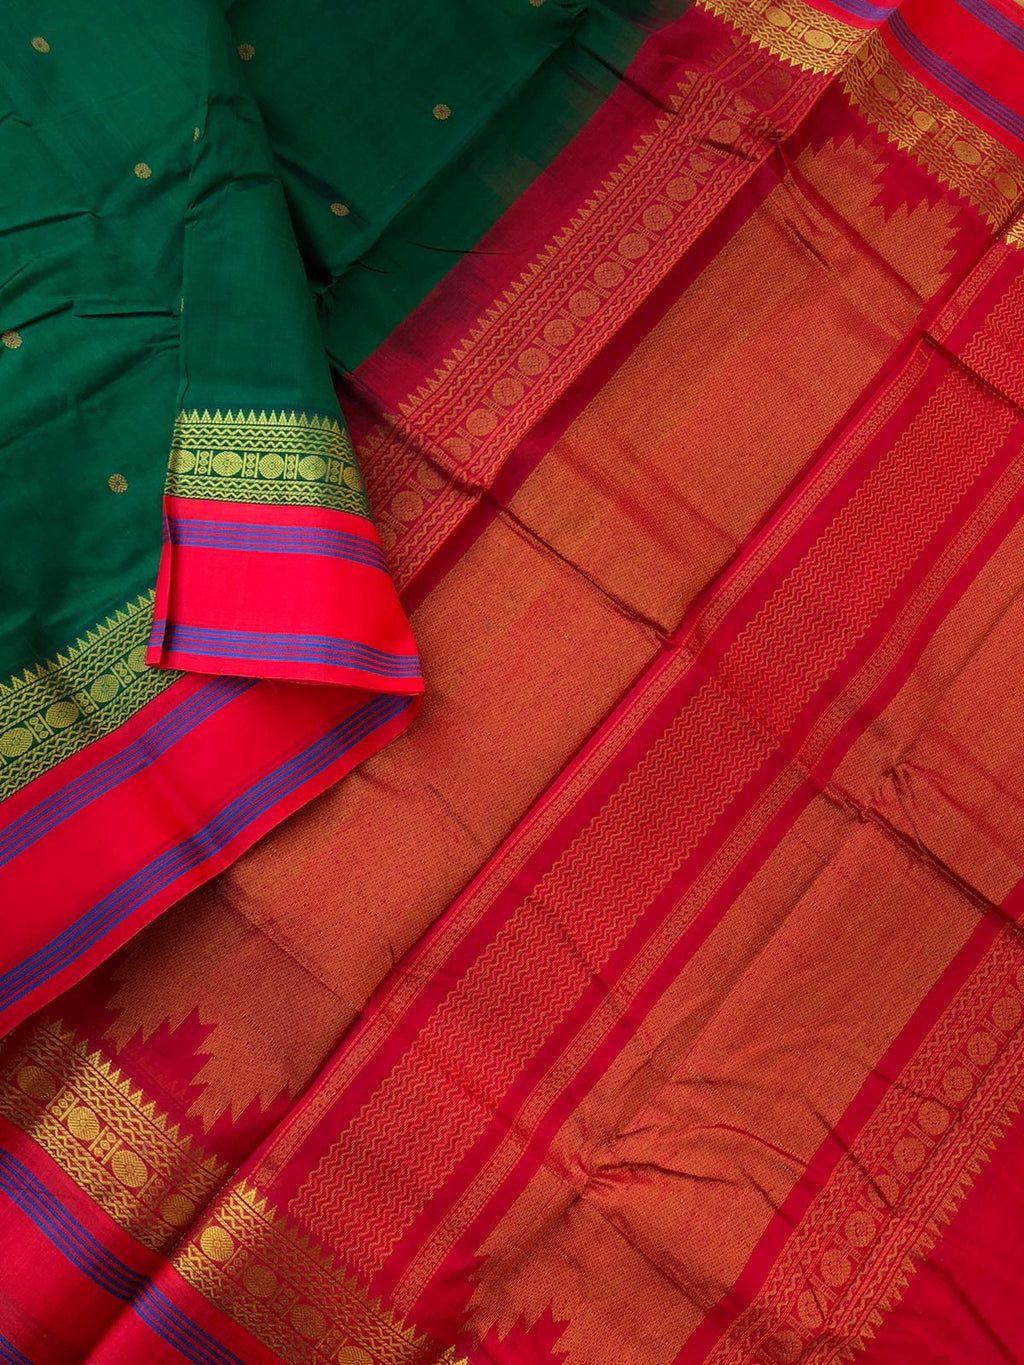 Divyam - Korvai Silk Cotton with Pure Silk Woven Borders - Meenakshi green and red